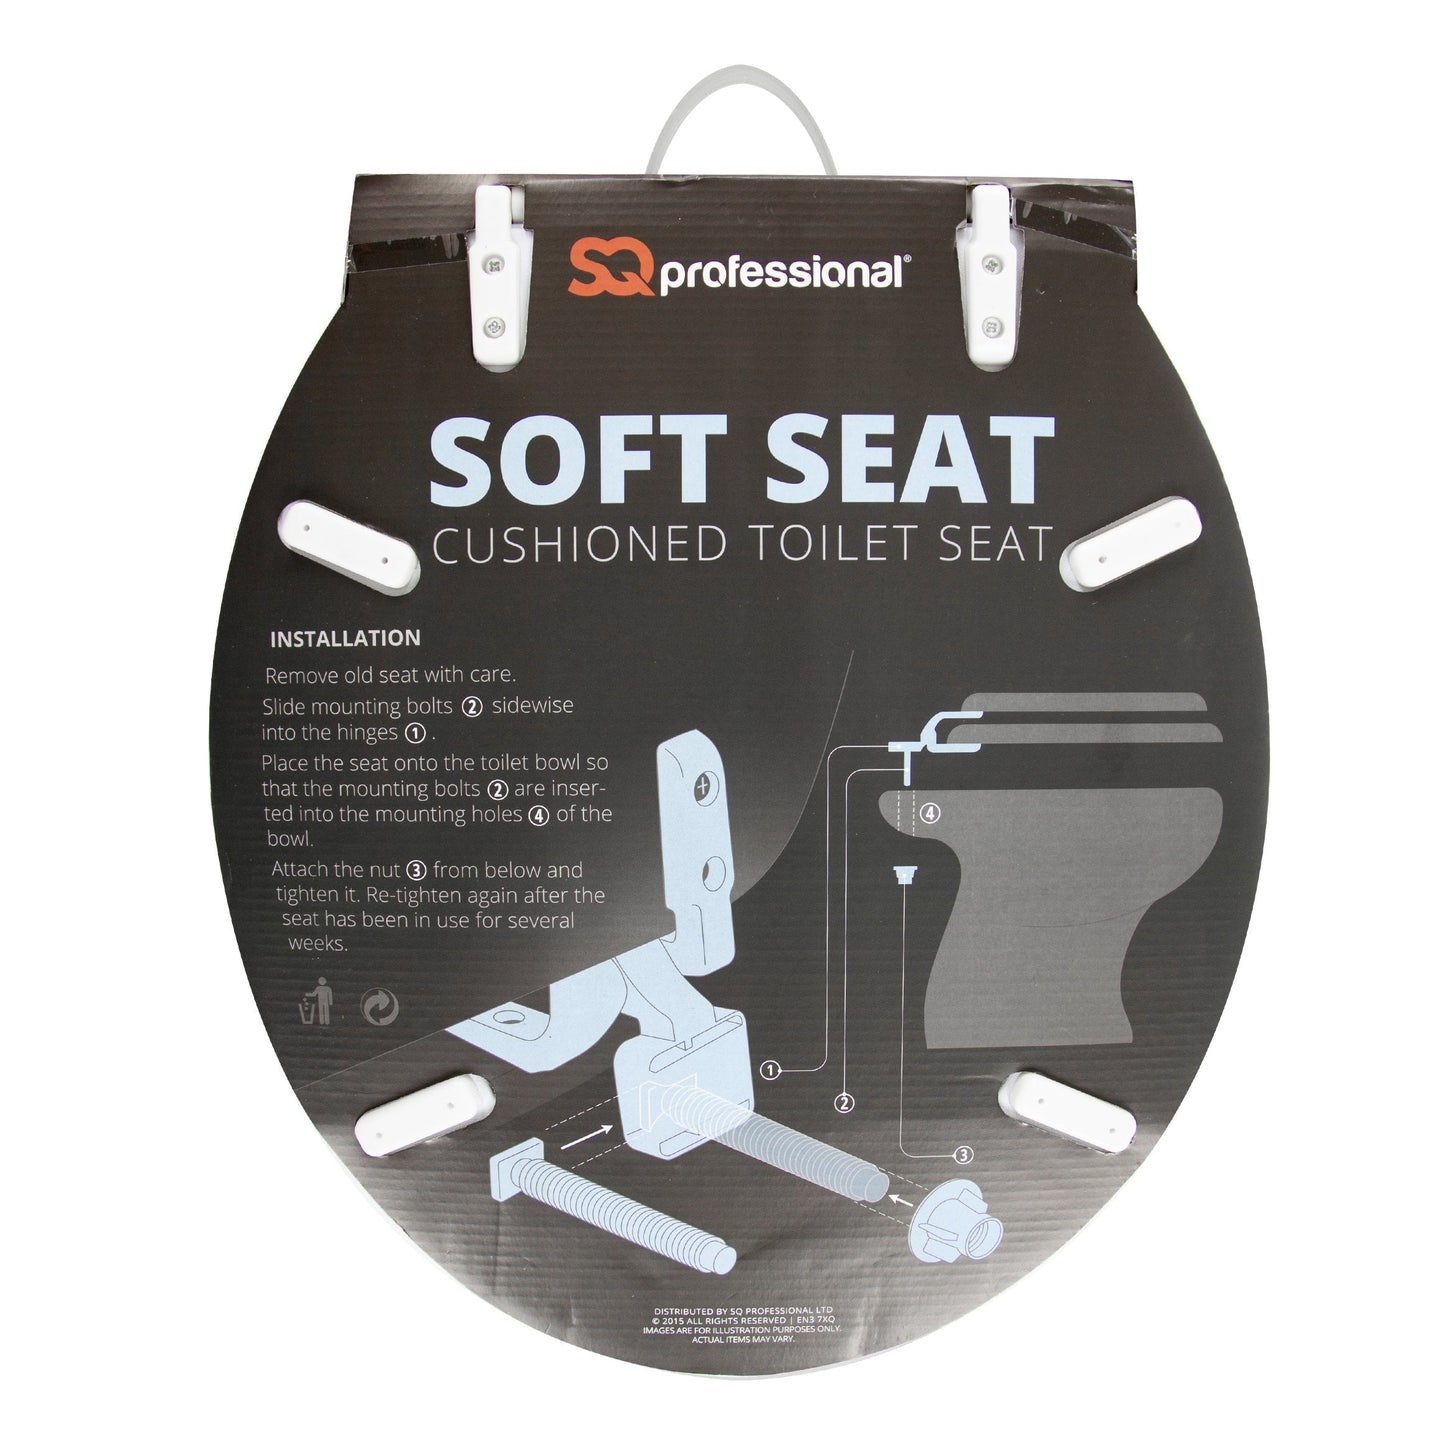 White Soft Seat Cushioned Toilet Seat Comfortable Seating Easy Install Home Diy 7800 (Parcel Rate)